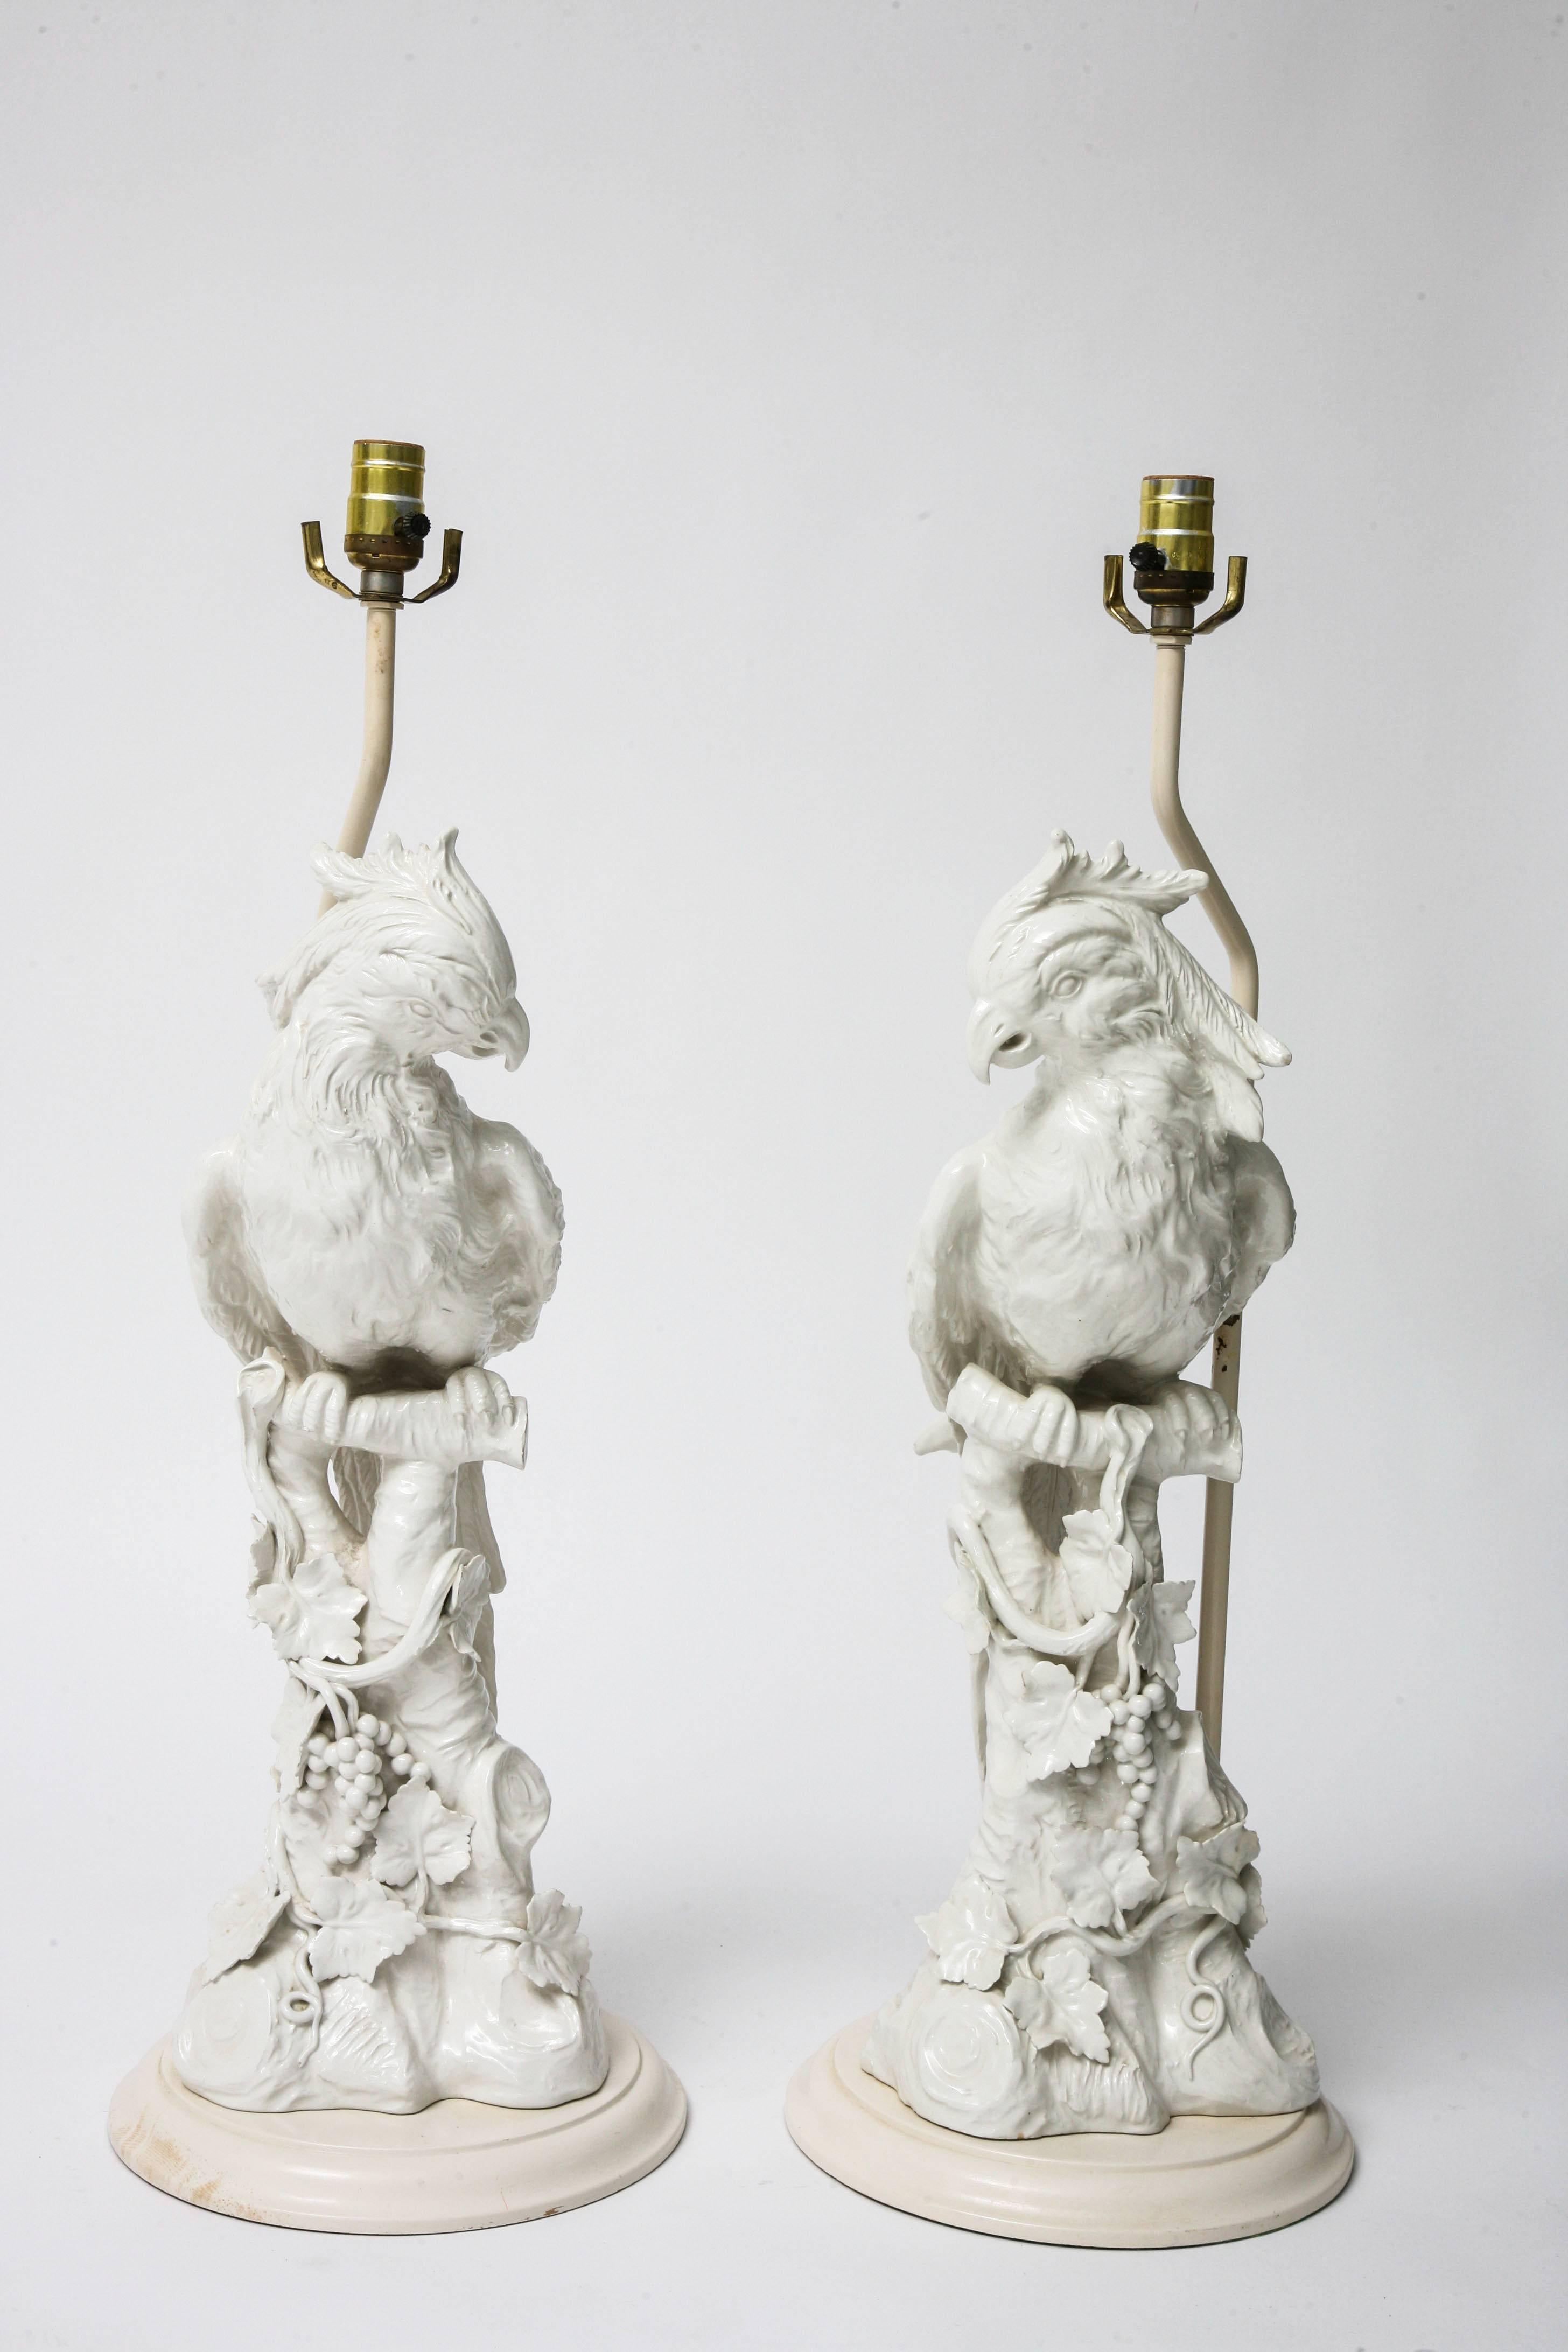 This pair of table lamps are the height of the Hollywood-Regency Style from the mid-part of the century. The figural parrots are (Italian) ceramic with a bone-white glaze and the base is a light-beige-white coloration. 

Note: The dimensions of